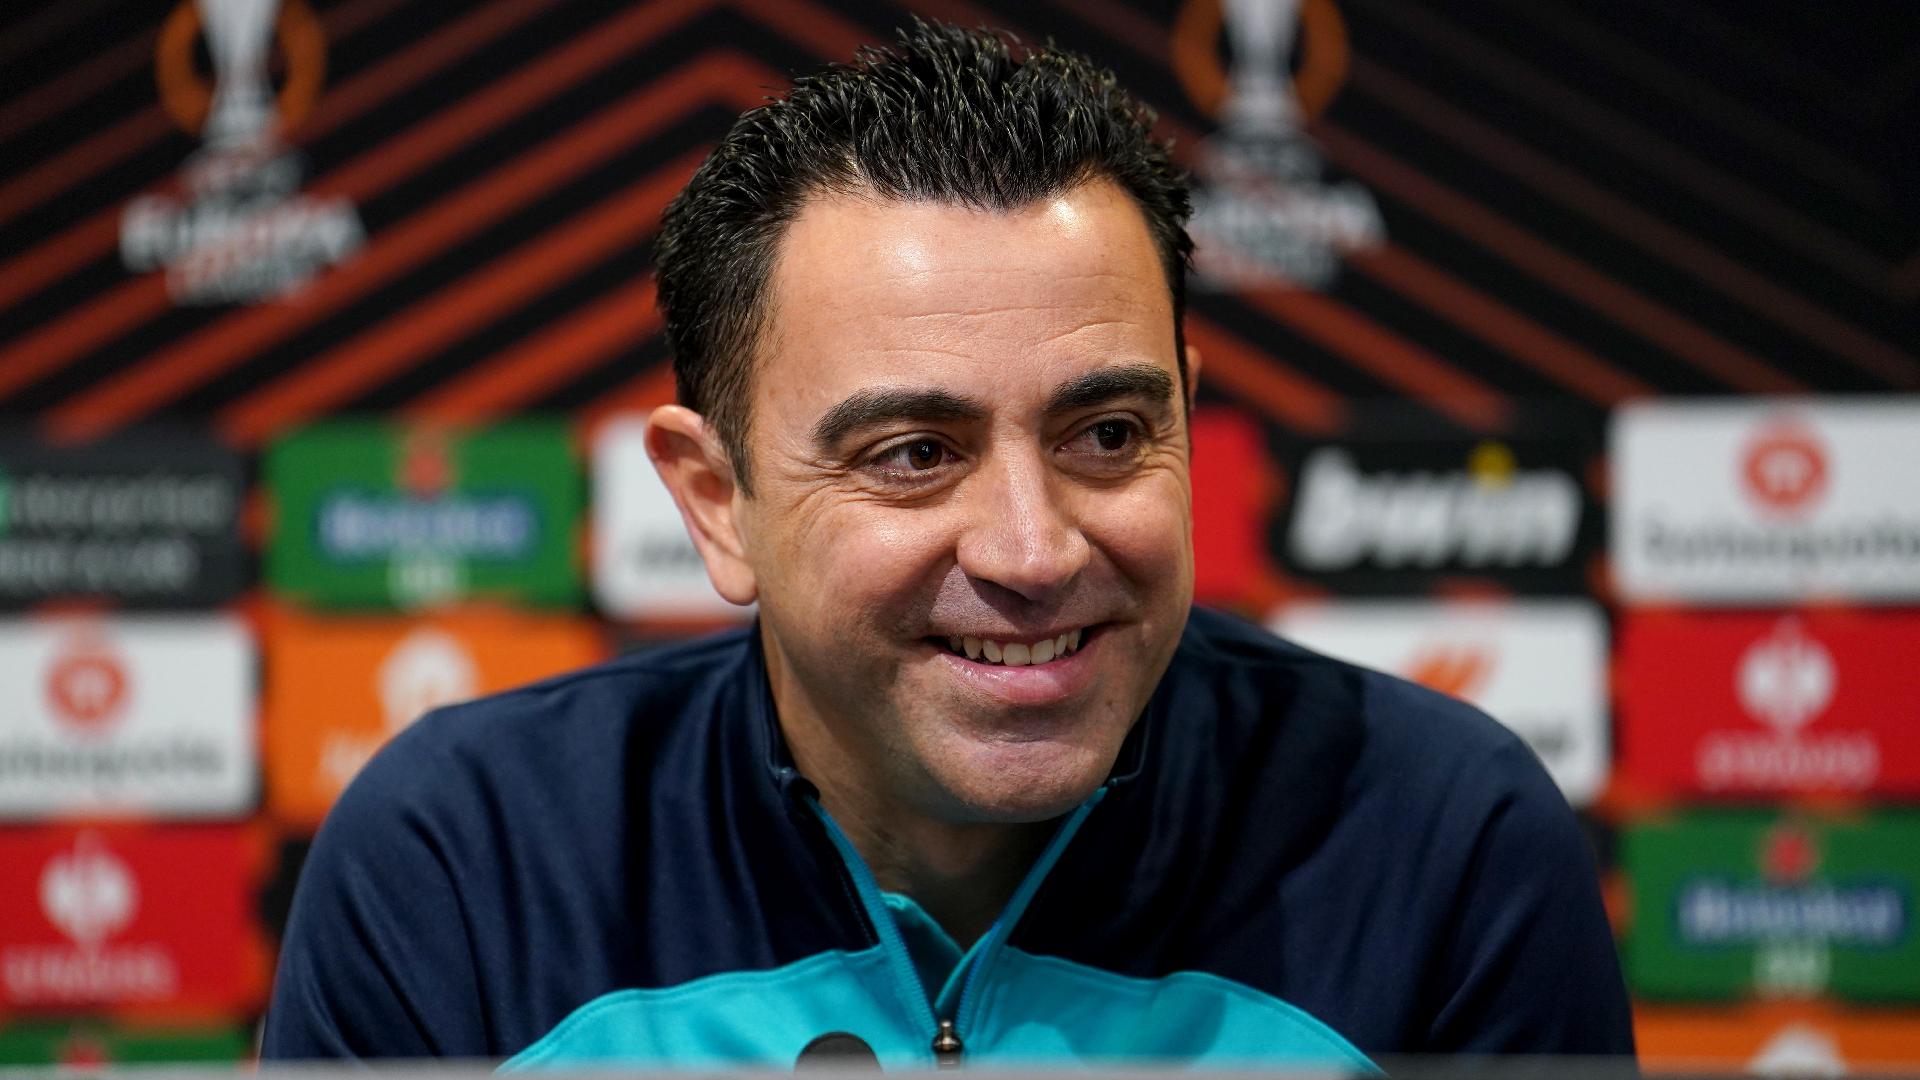 Xavi’s new contract at Barcelona not his main priority with busy period coming